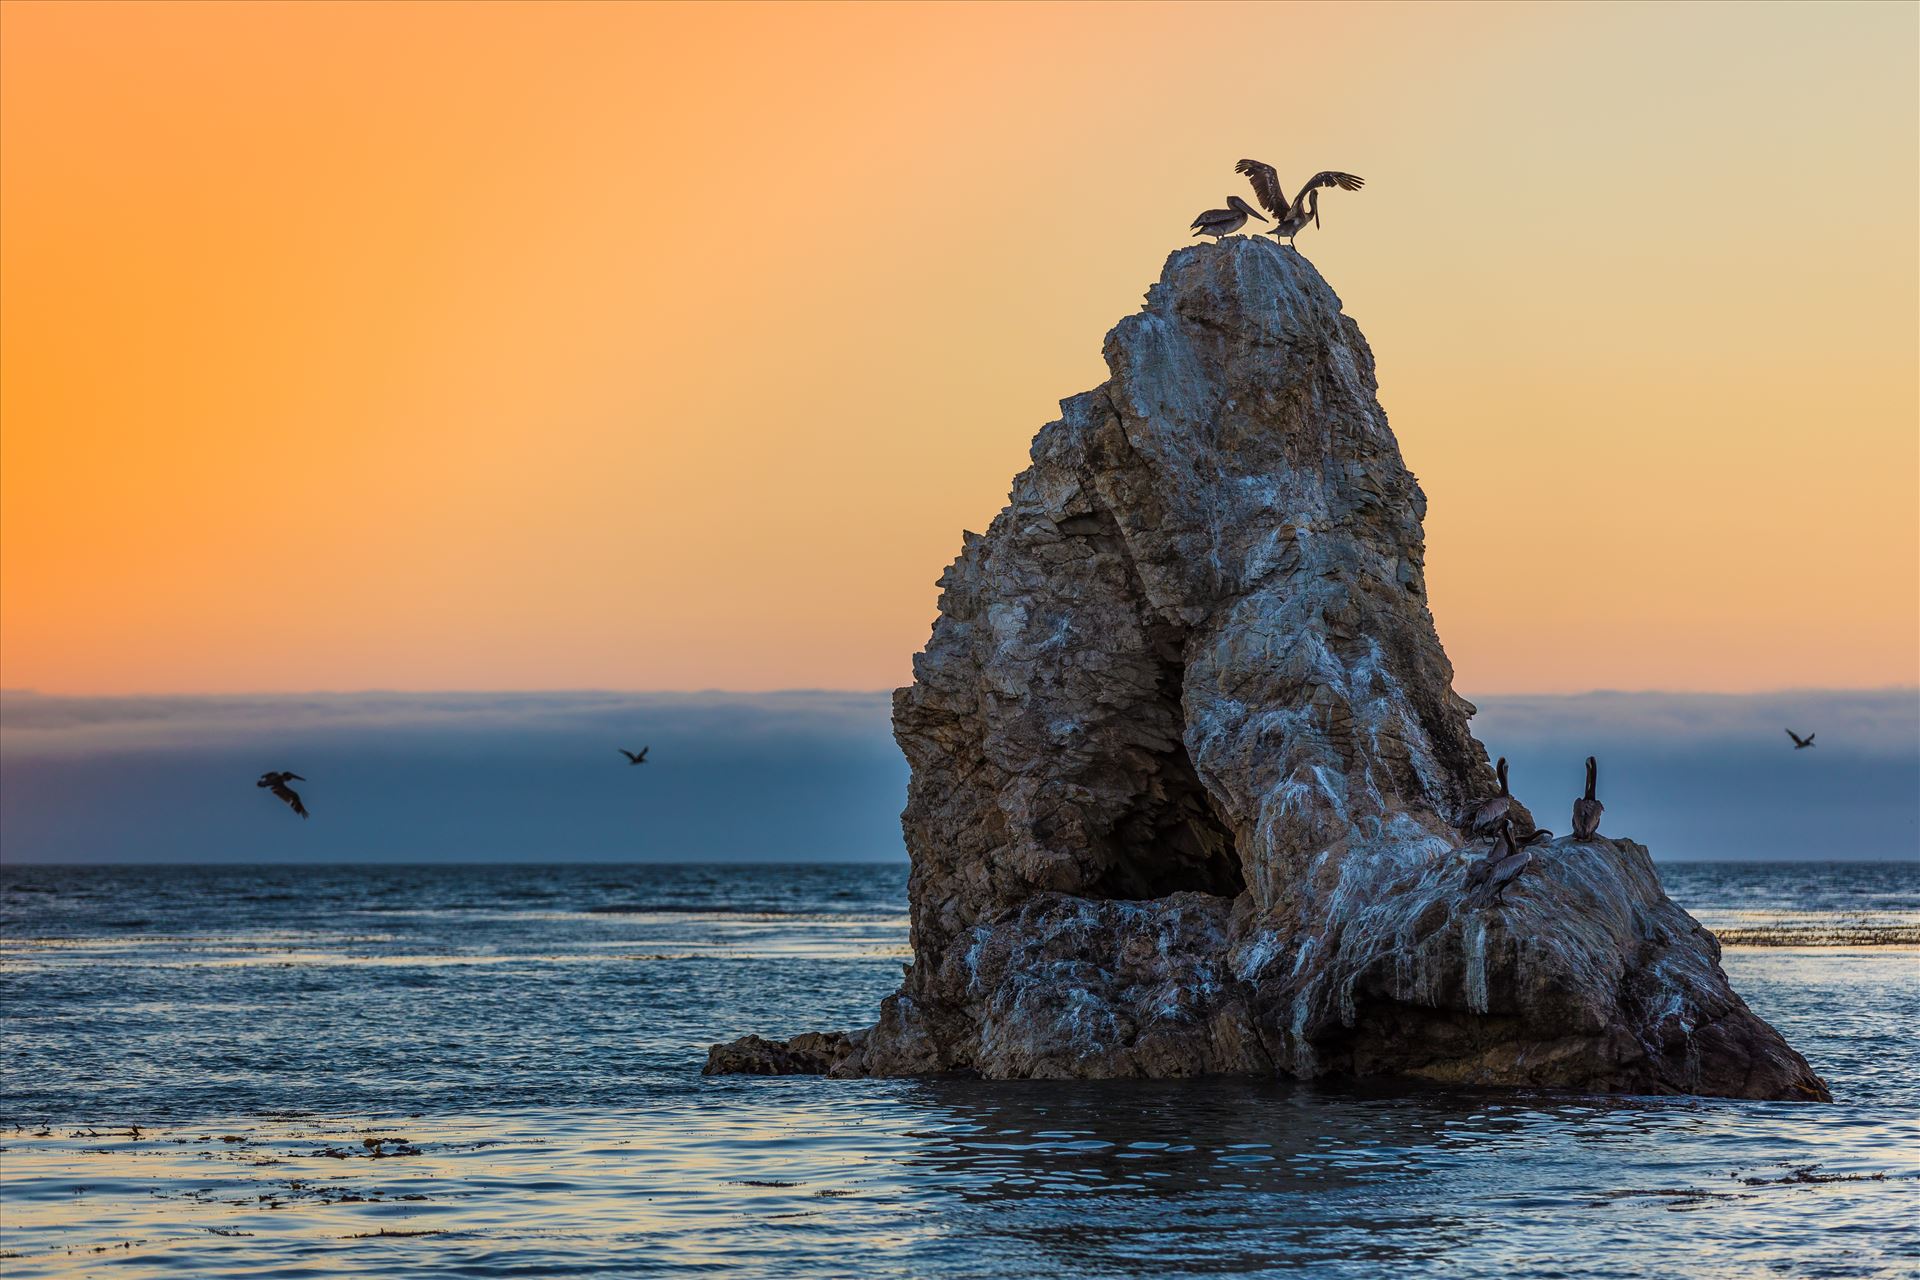 Pelican Rock - Pelicans roosting, taken from the edge of the beach Pismo Beach, California by Scott Smith Photos